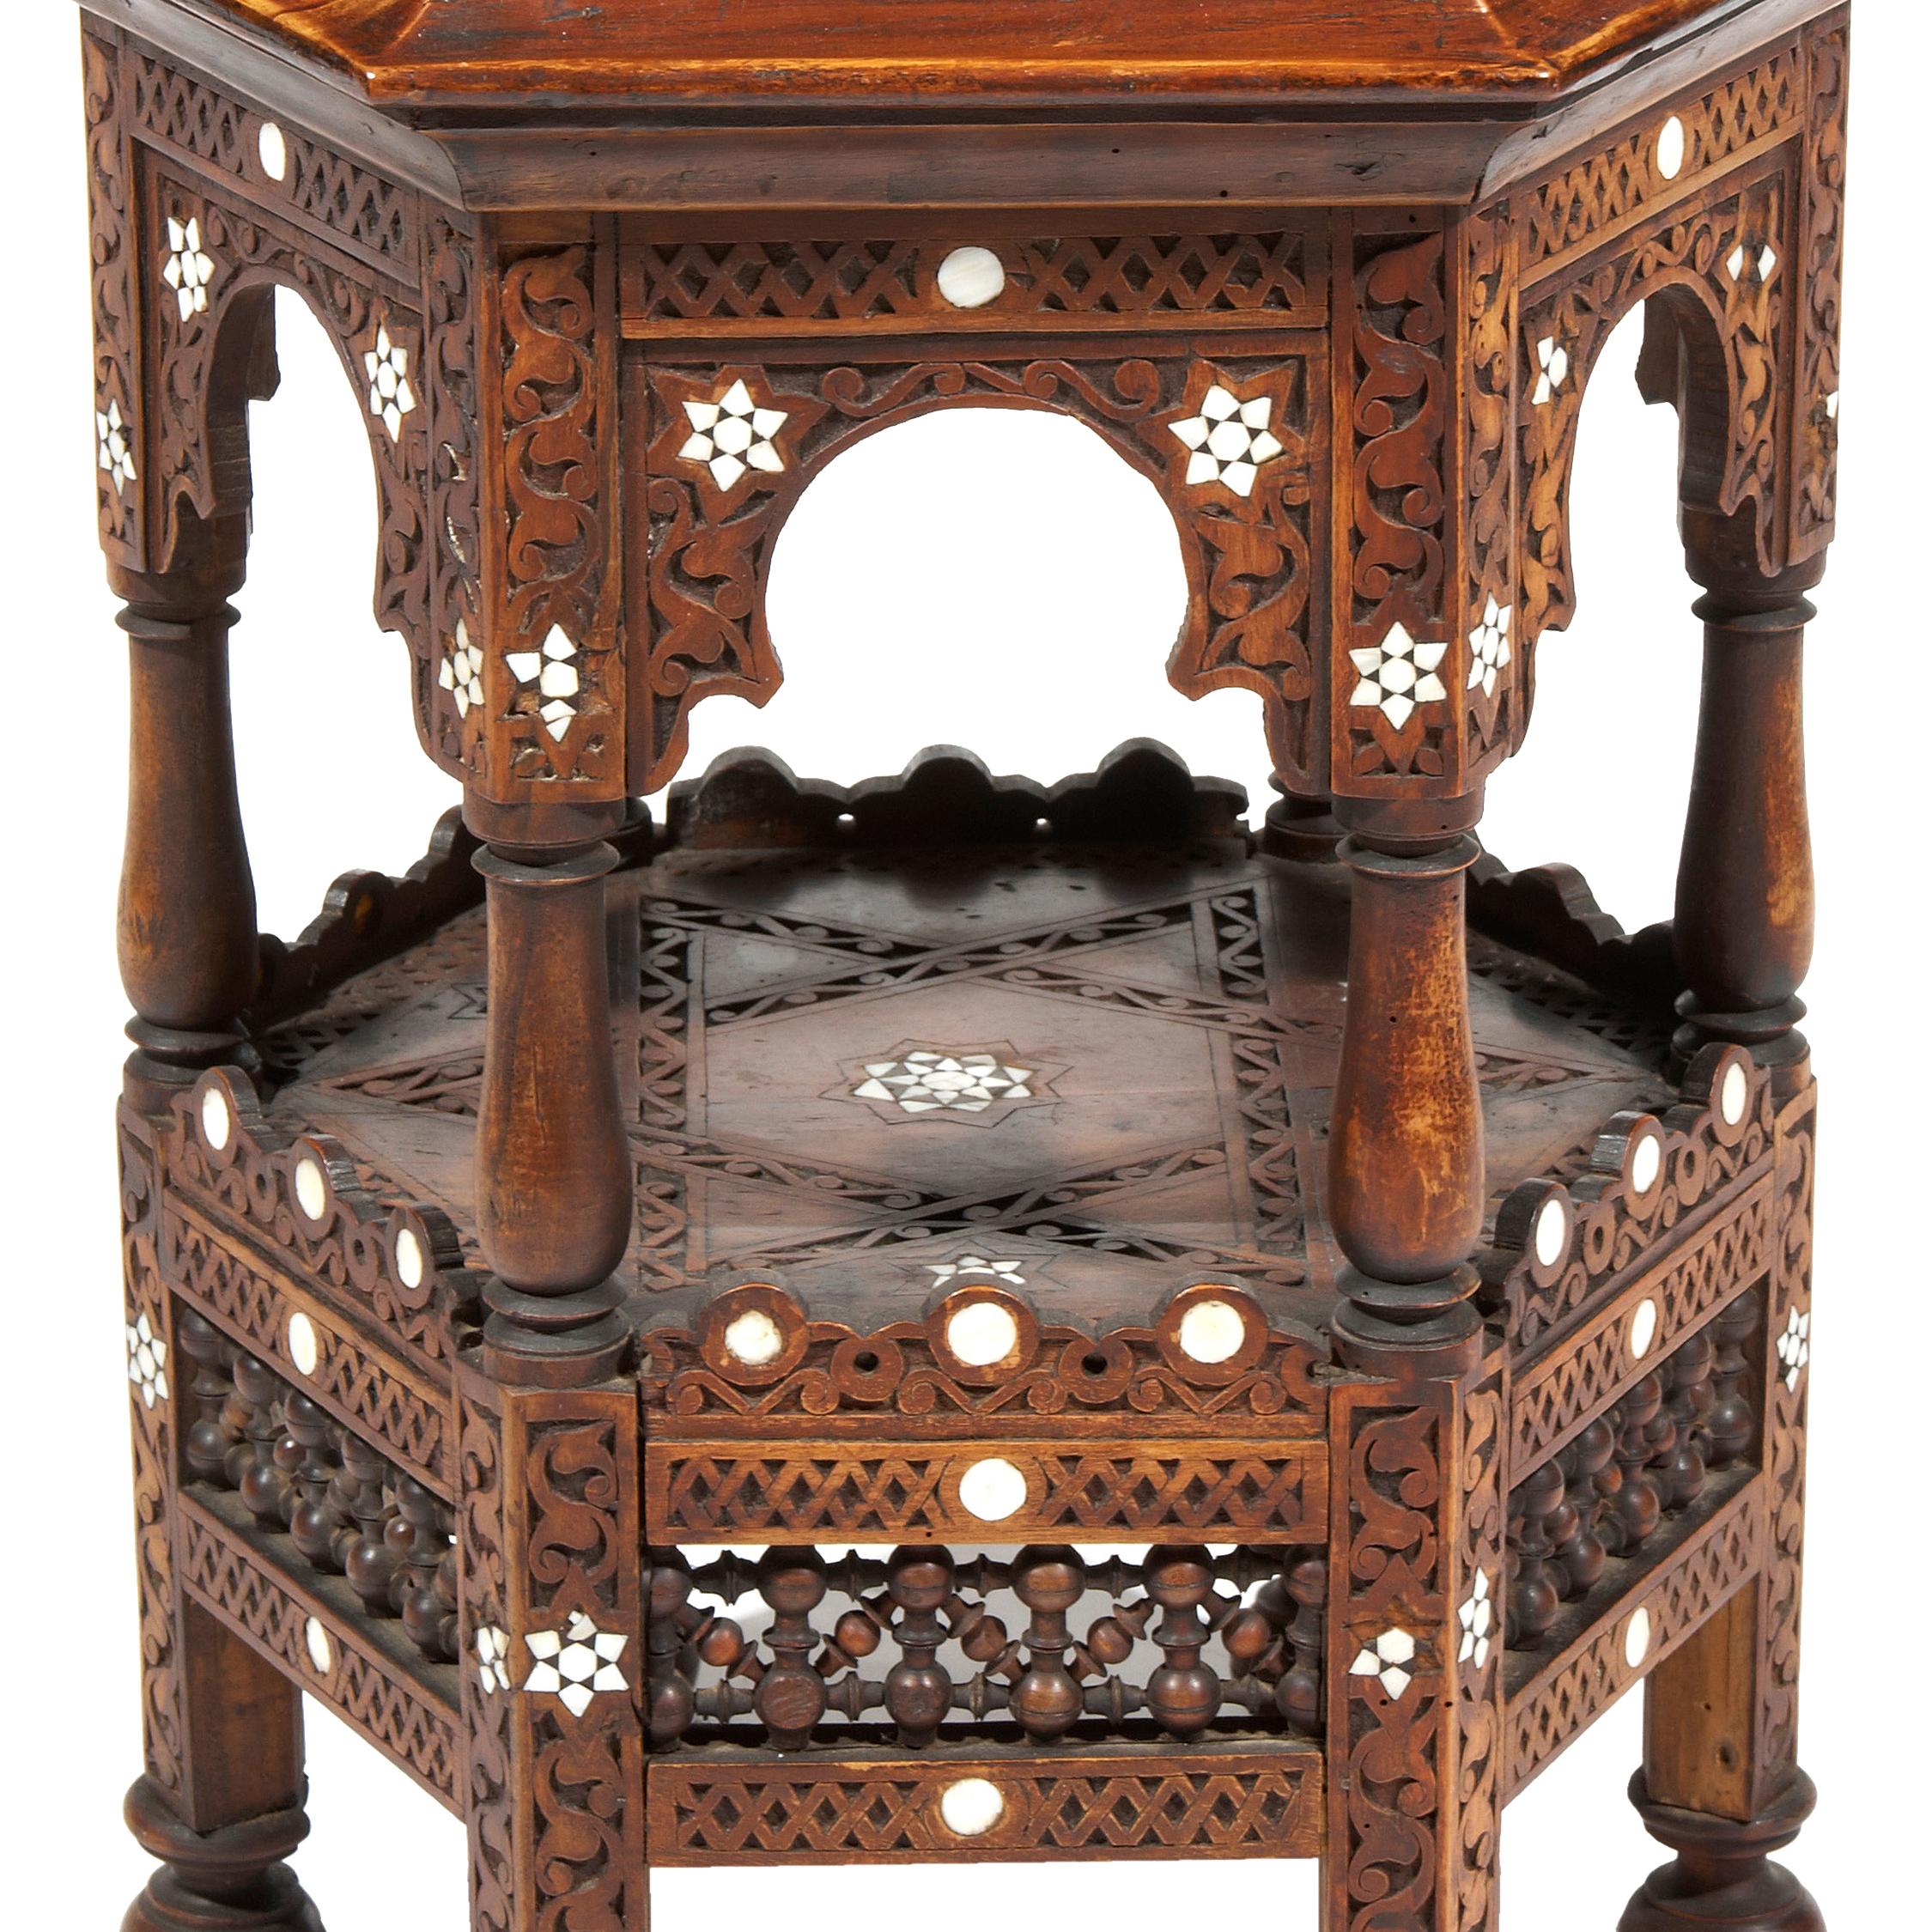 Islamic Early 19th Century North African Mahogany Hexagonal Occasional Table